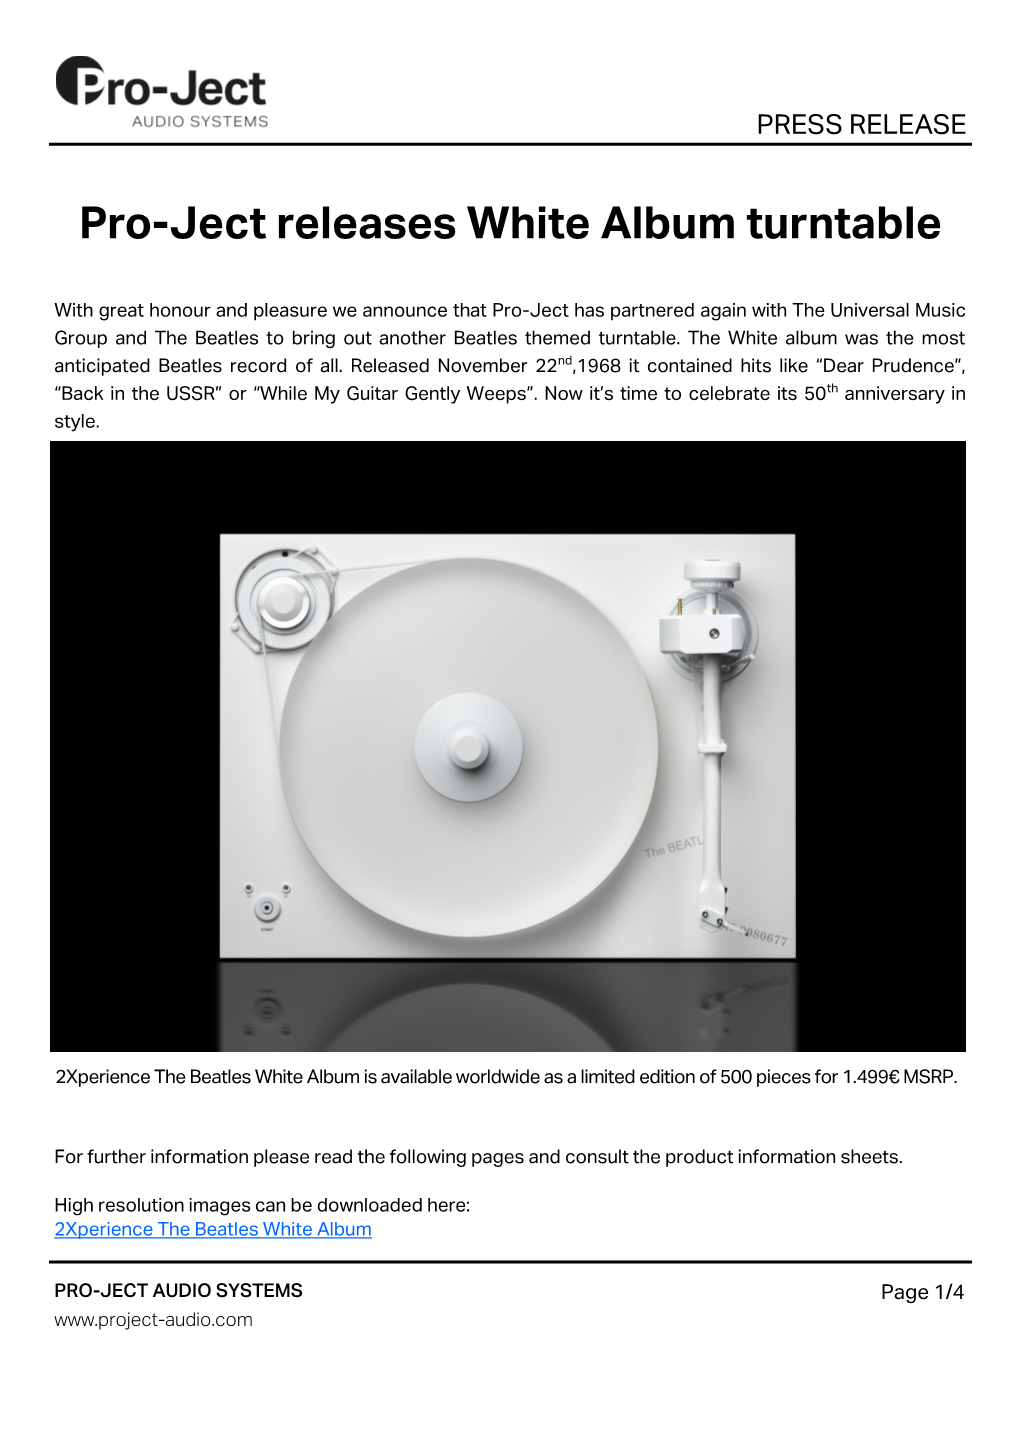 Pro-Ject Releases White Album Turntable